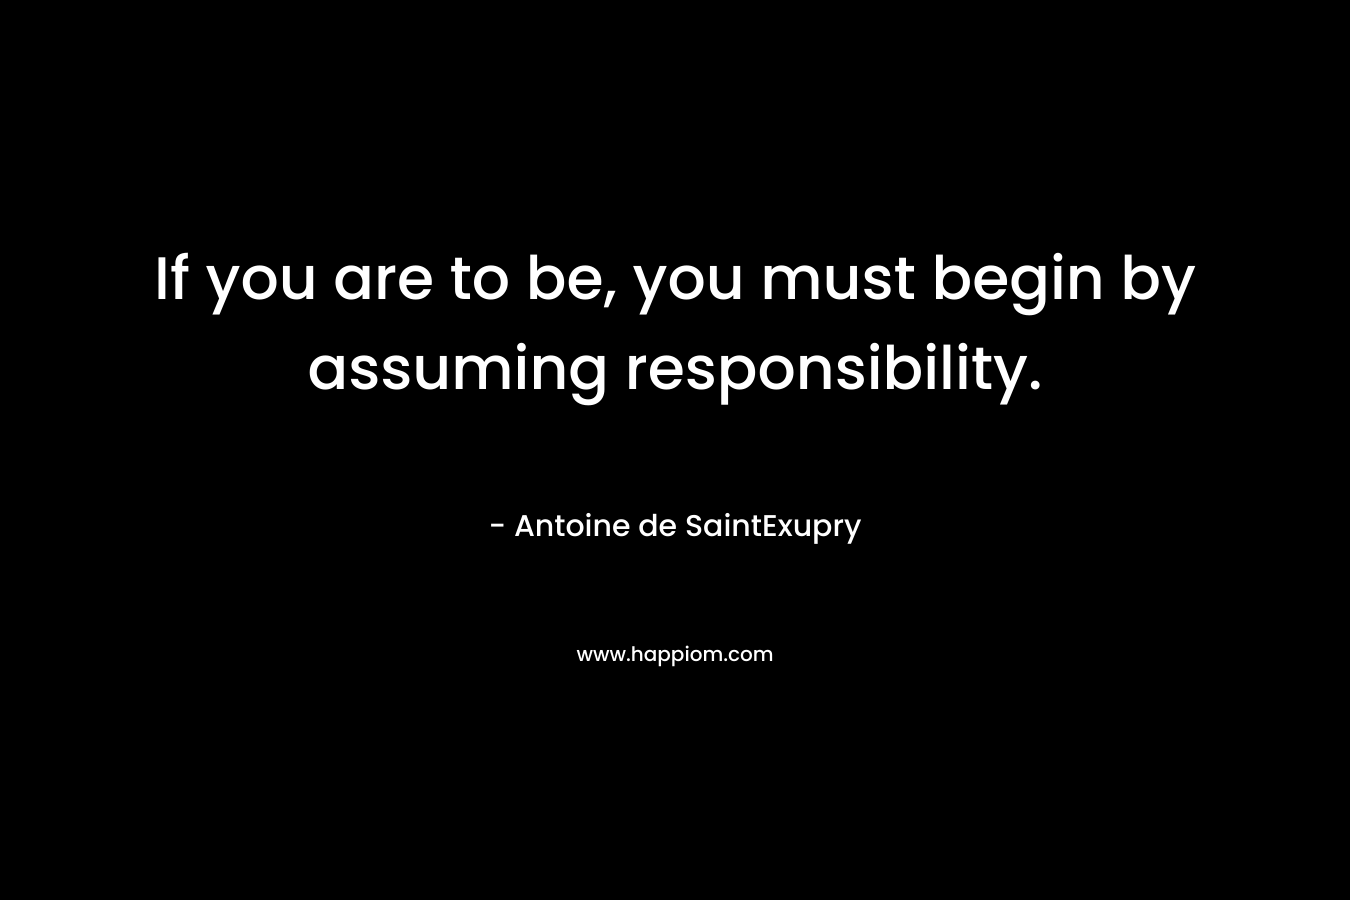 If you are to be, you must begin by assuming responsibility. – Antoine de SaintExupry